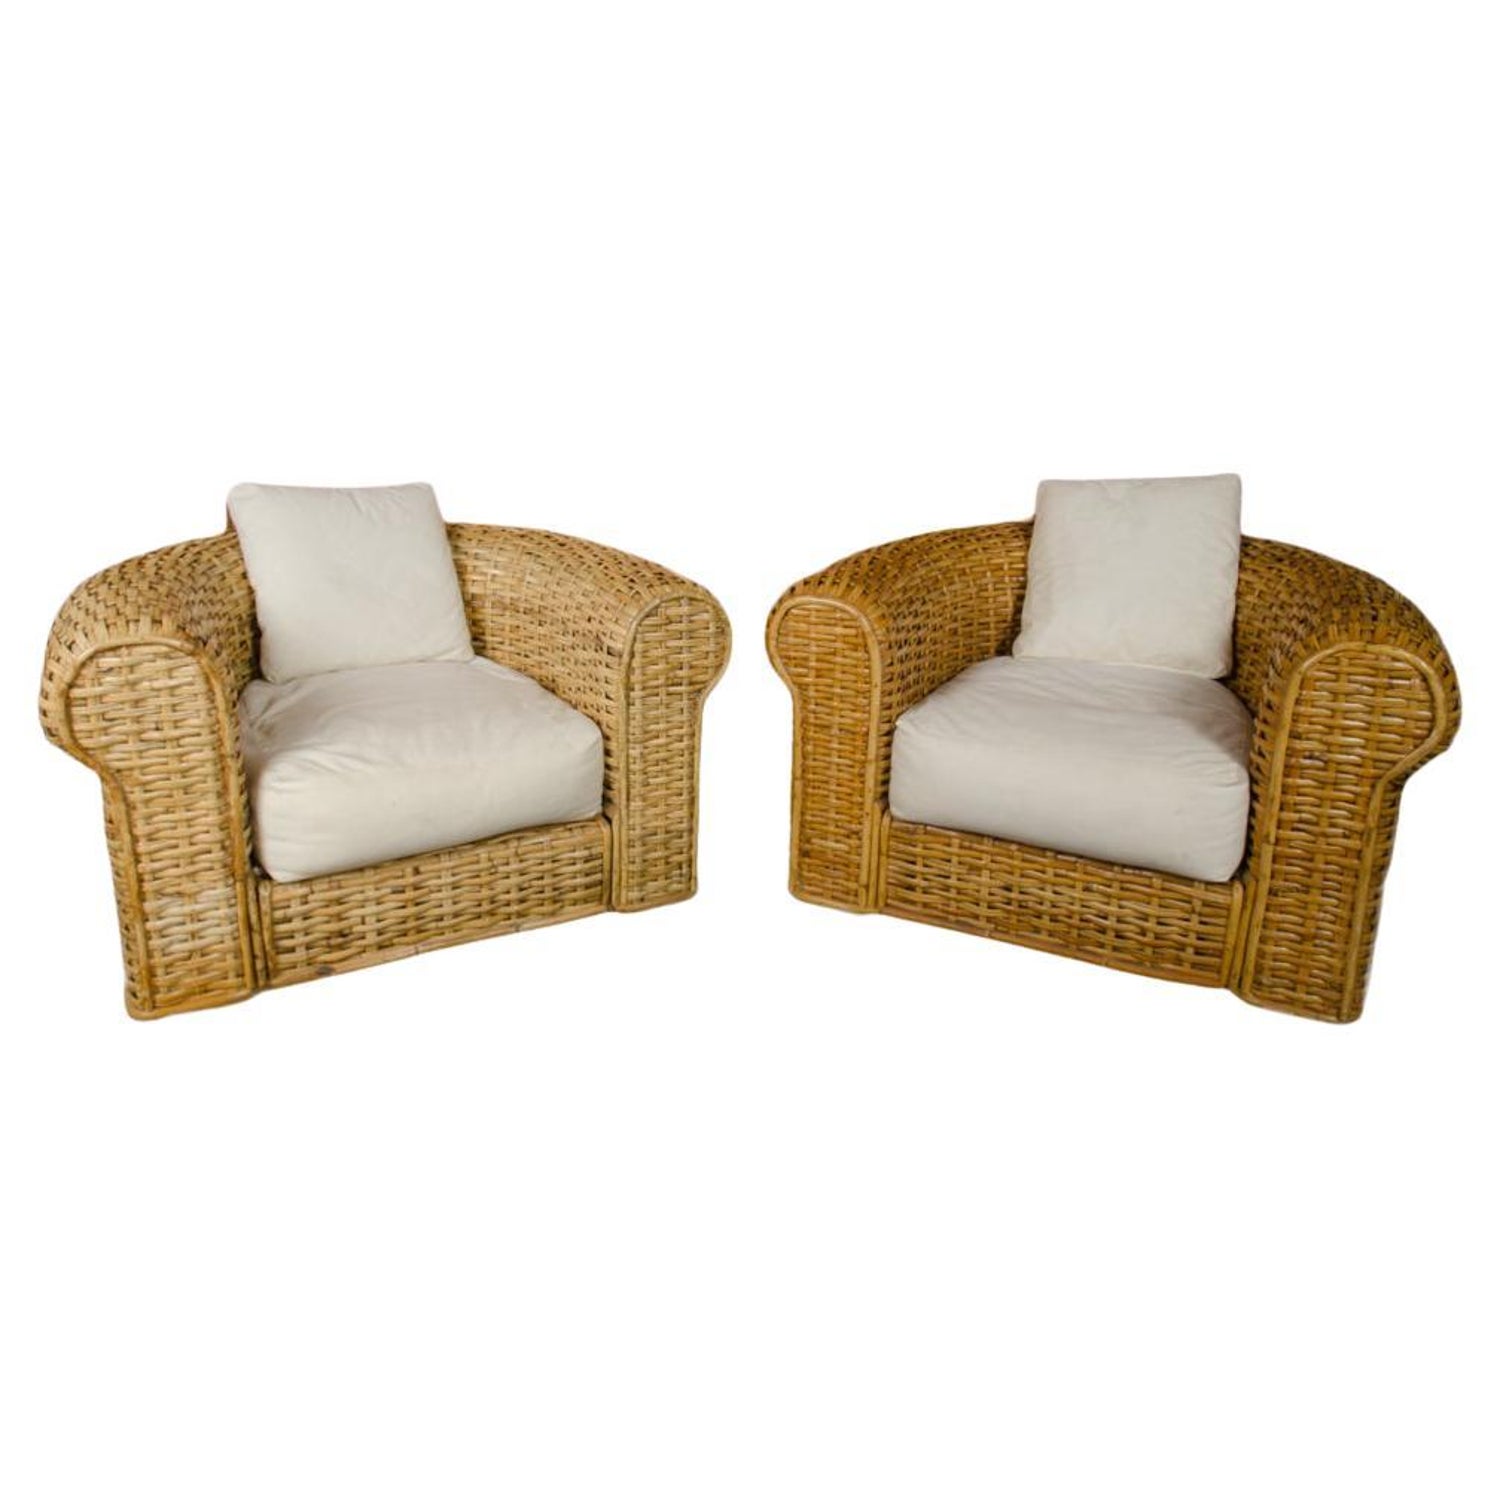 Pair of Ralph Lauren Home Polo Collection Woven Rattan Armchairs, Late 20th  c. For Sale at 1stDibs